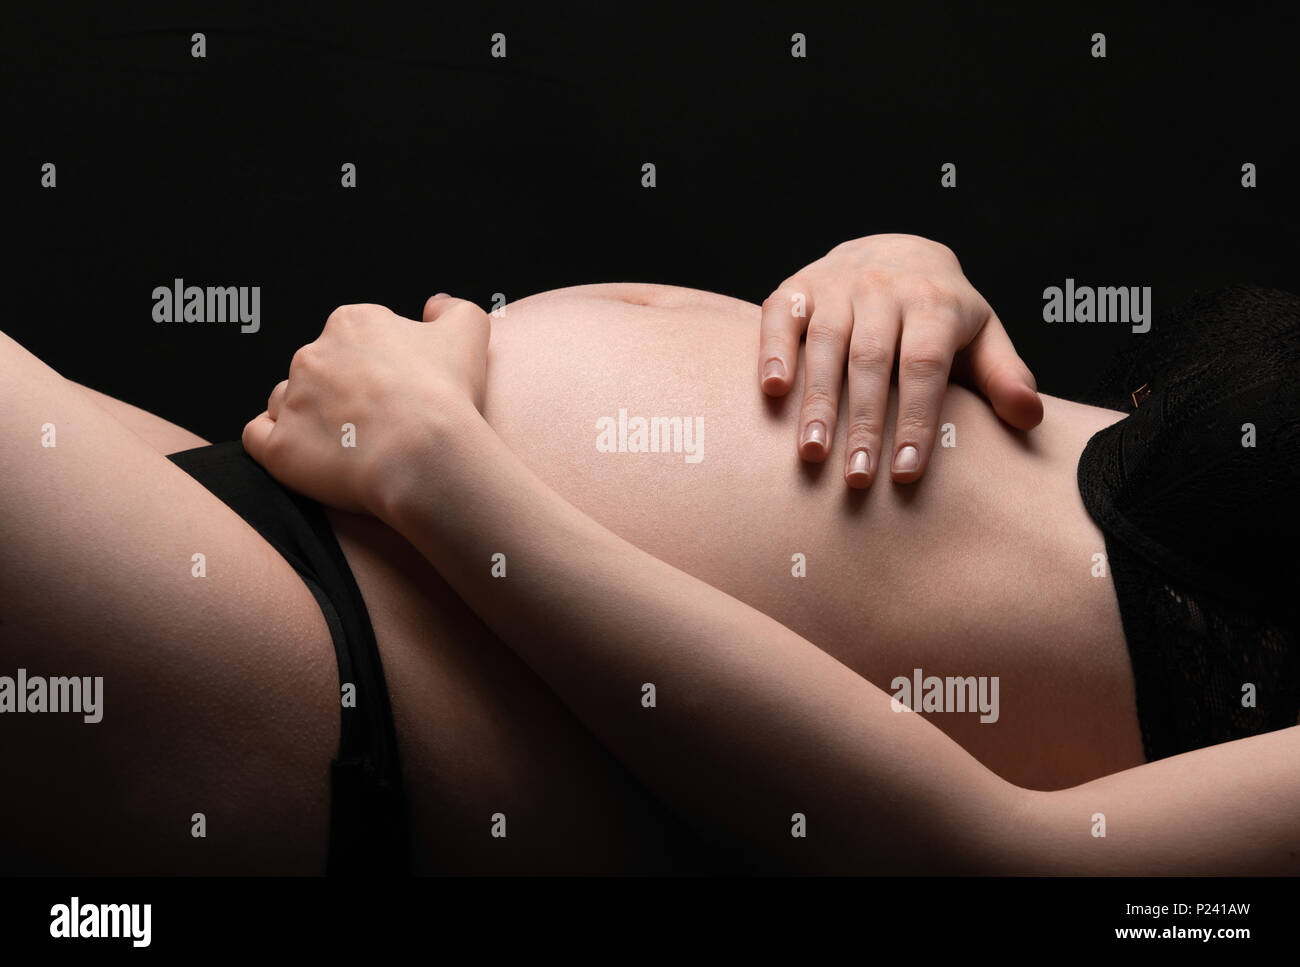 close-up of pregnant woman Stock Photo